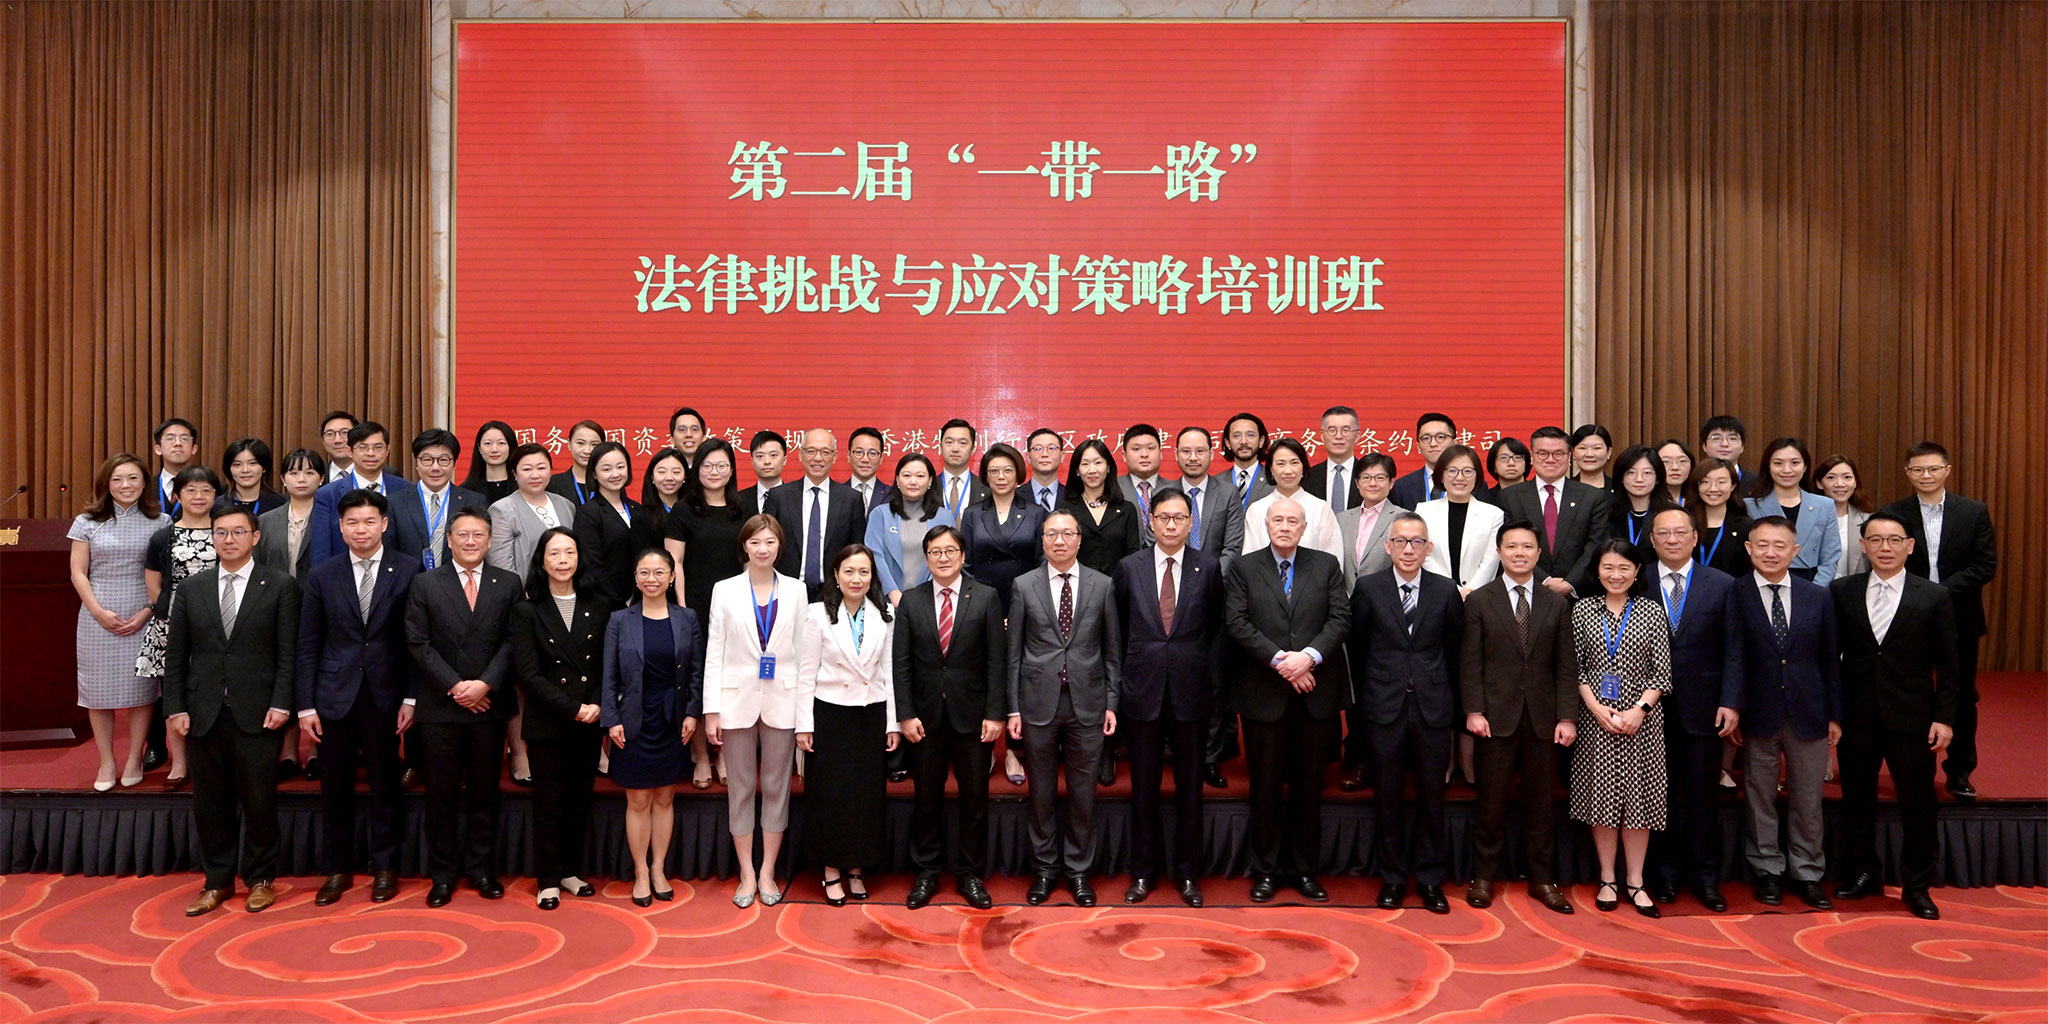 The Secretary for Justice, Mr Paul Lam, SC, led a Hong Kong legal and dispute resolution sector delegation to attend the second seminar on the legal challenges and coping strategies under the Belt and Road Initiative organised by the State-owned Assets Supervision and Administration Commission of the State Council and co-organised by the Department of Treaty and Law of the Ministry of Commerce and the Department of Justice today (August 25) in Beijing. Photo shows Mr Lam (front row, centre); the Chairman of the Hong Kong Bar Association, Mr Victor Dawes, SC (front row, eighth right); the President of the Law Society of Hong Kong, Mr Chan Chak-ming (front row, eighth left), and other members of the delegation at the event.